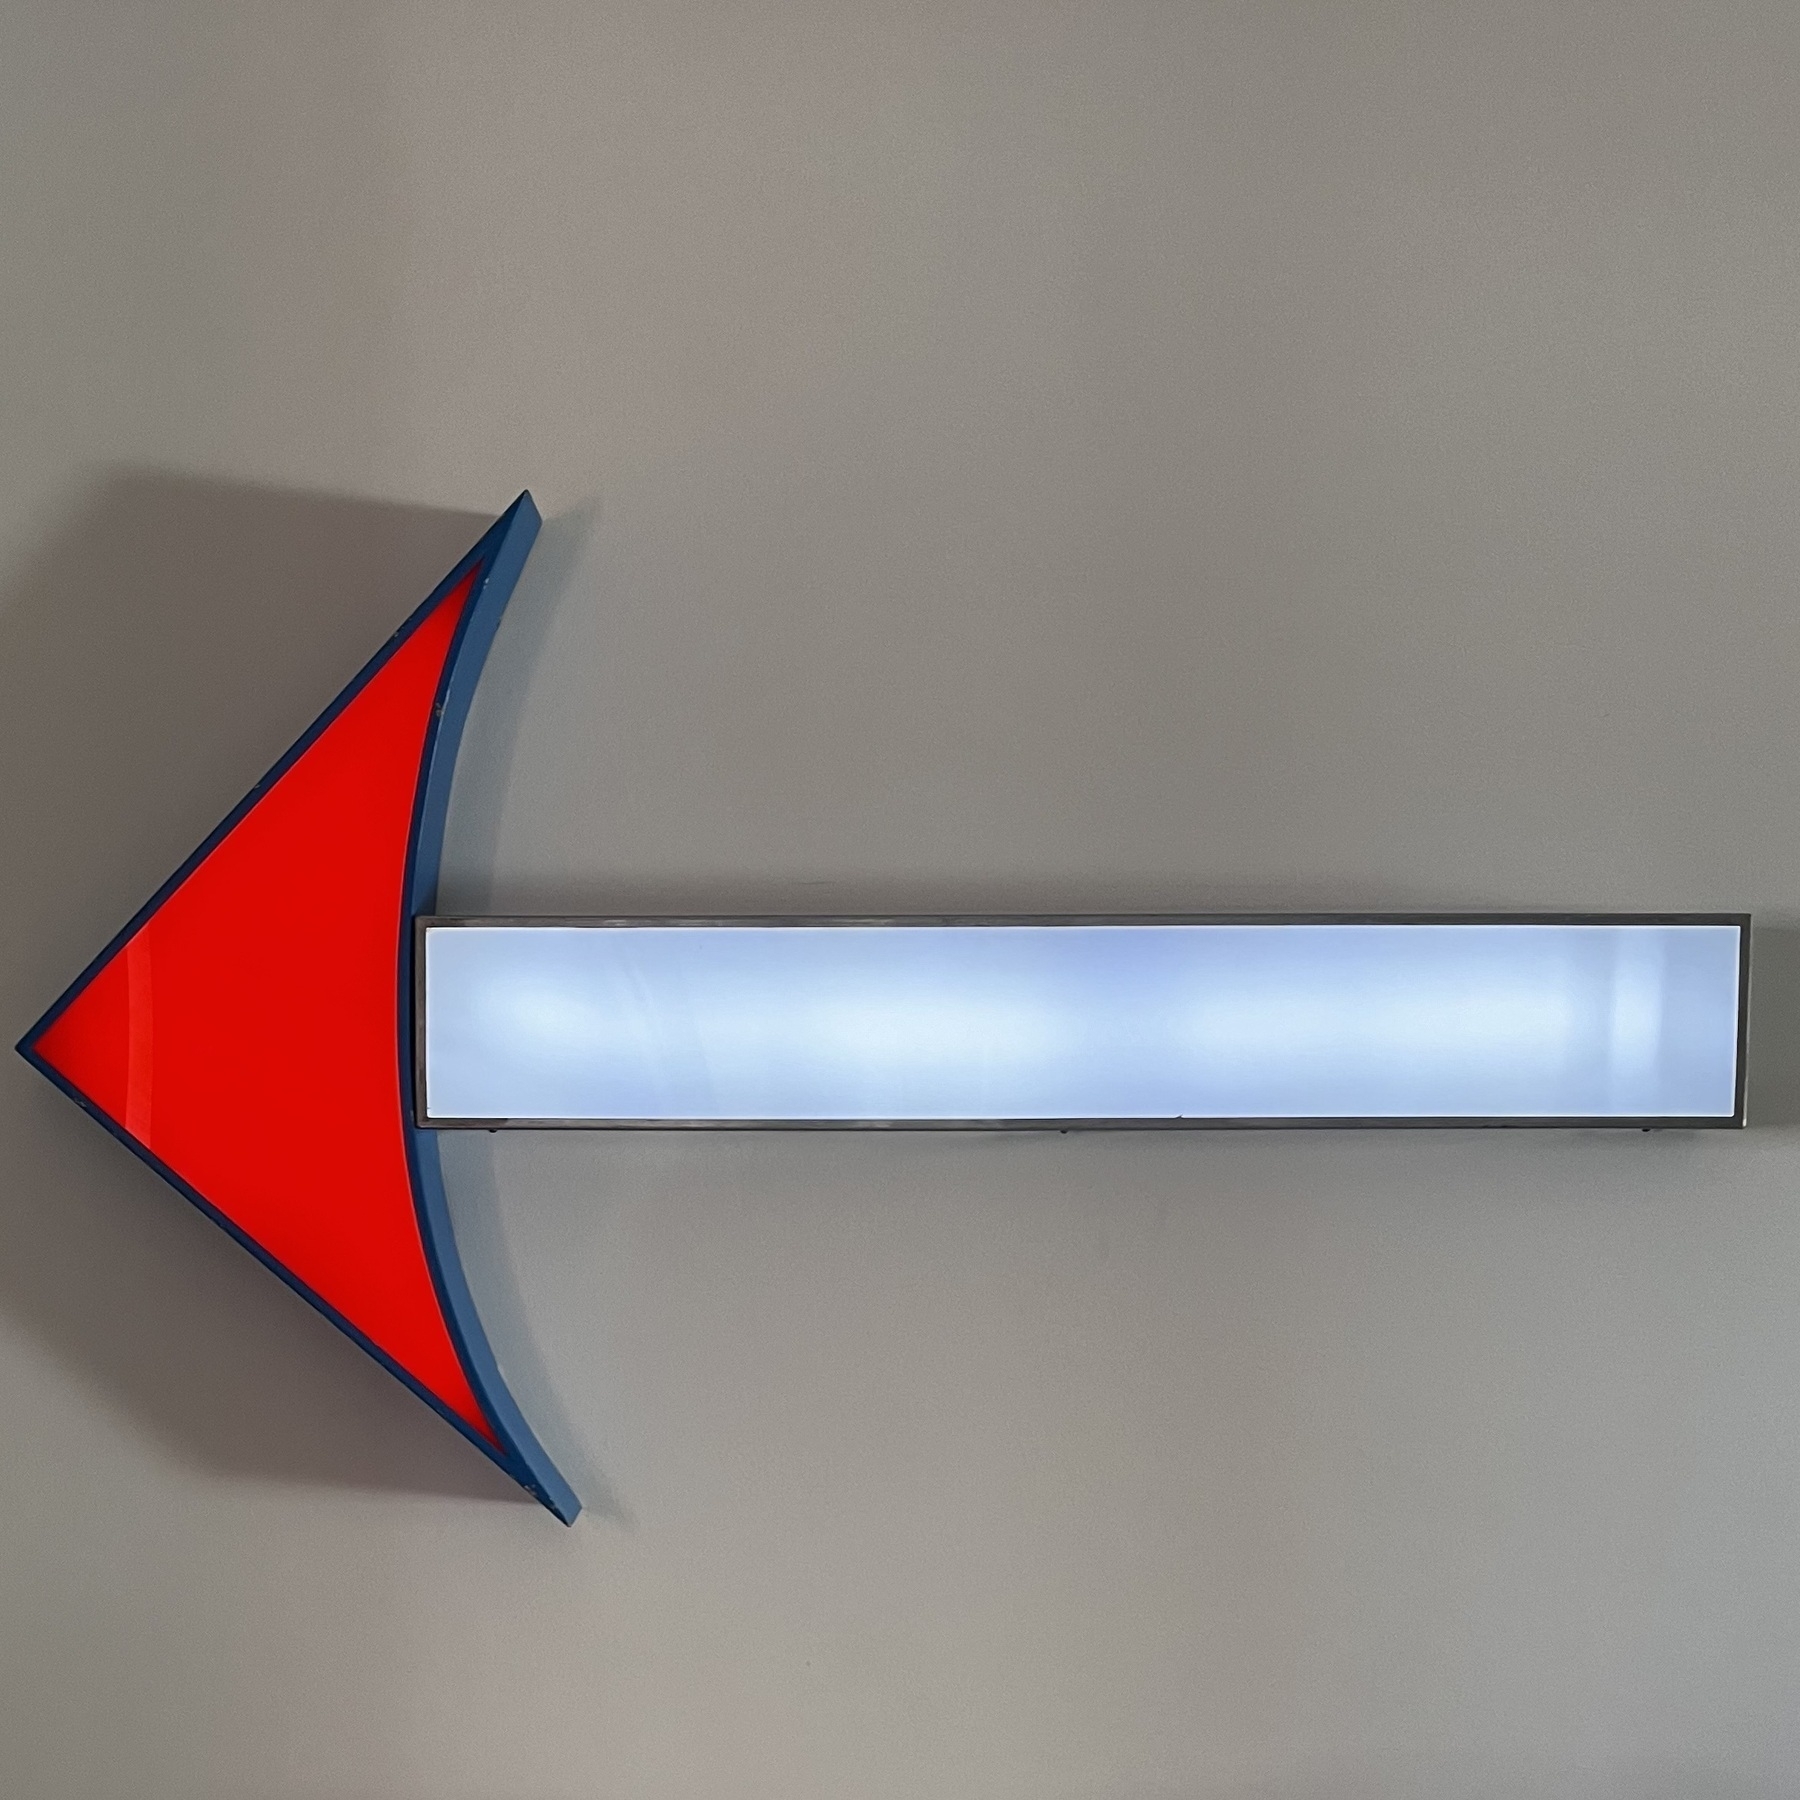 A large neon arrow made up of a red pointed end and white tail, all mounted on a white wall.